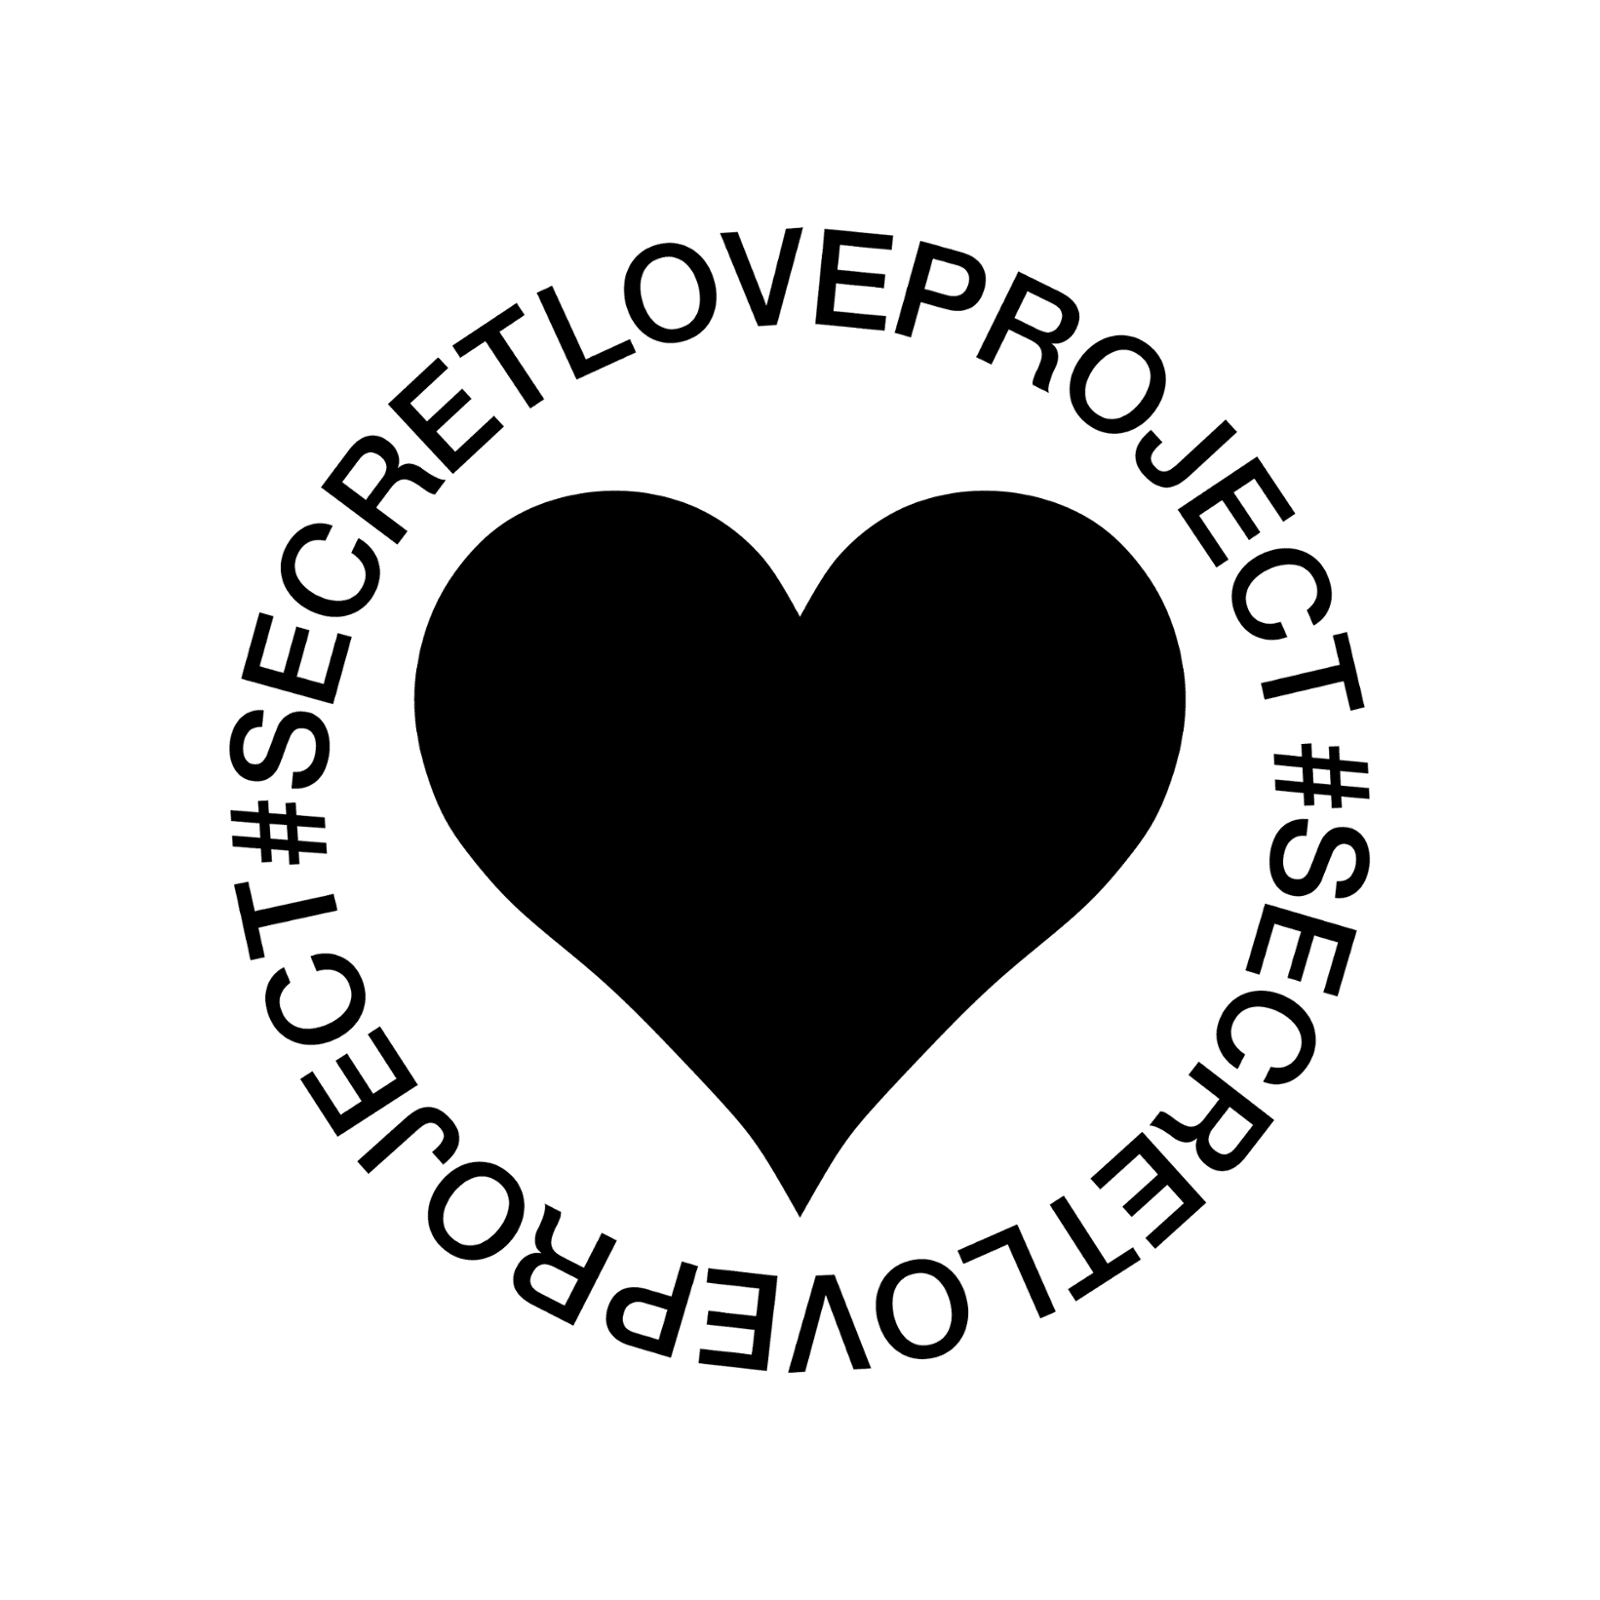 The Secret Love Project is a registered charity that offers the homeless a lifeline out of poverty